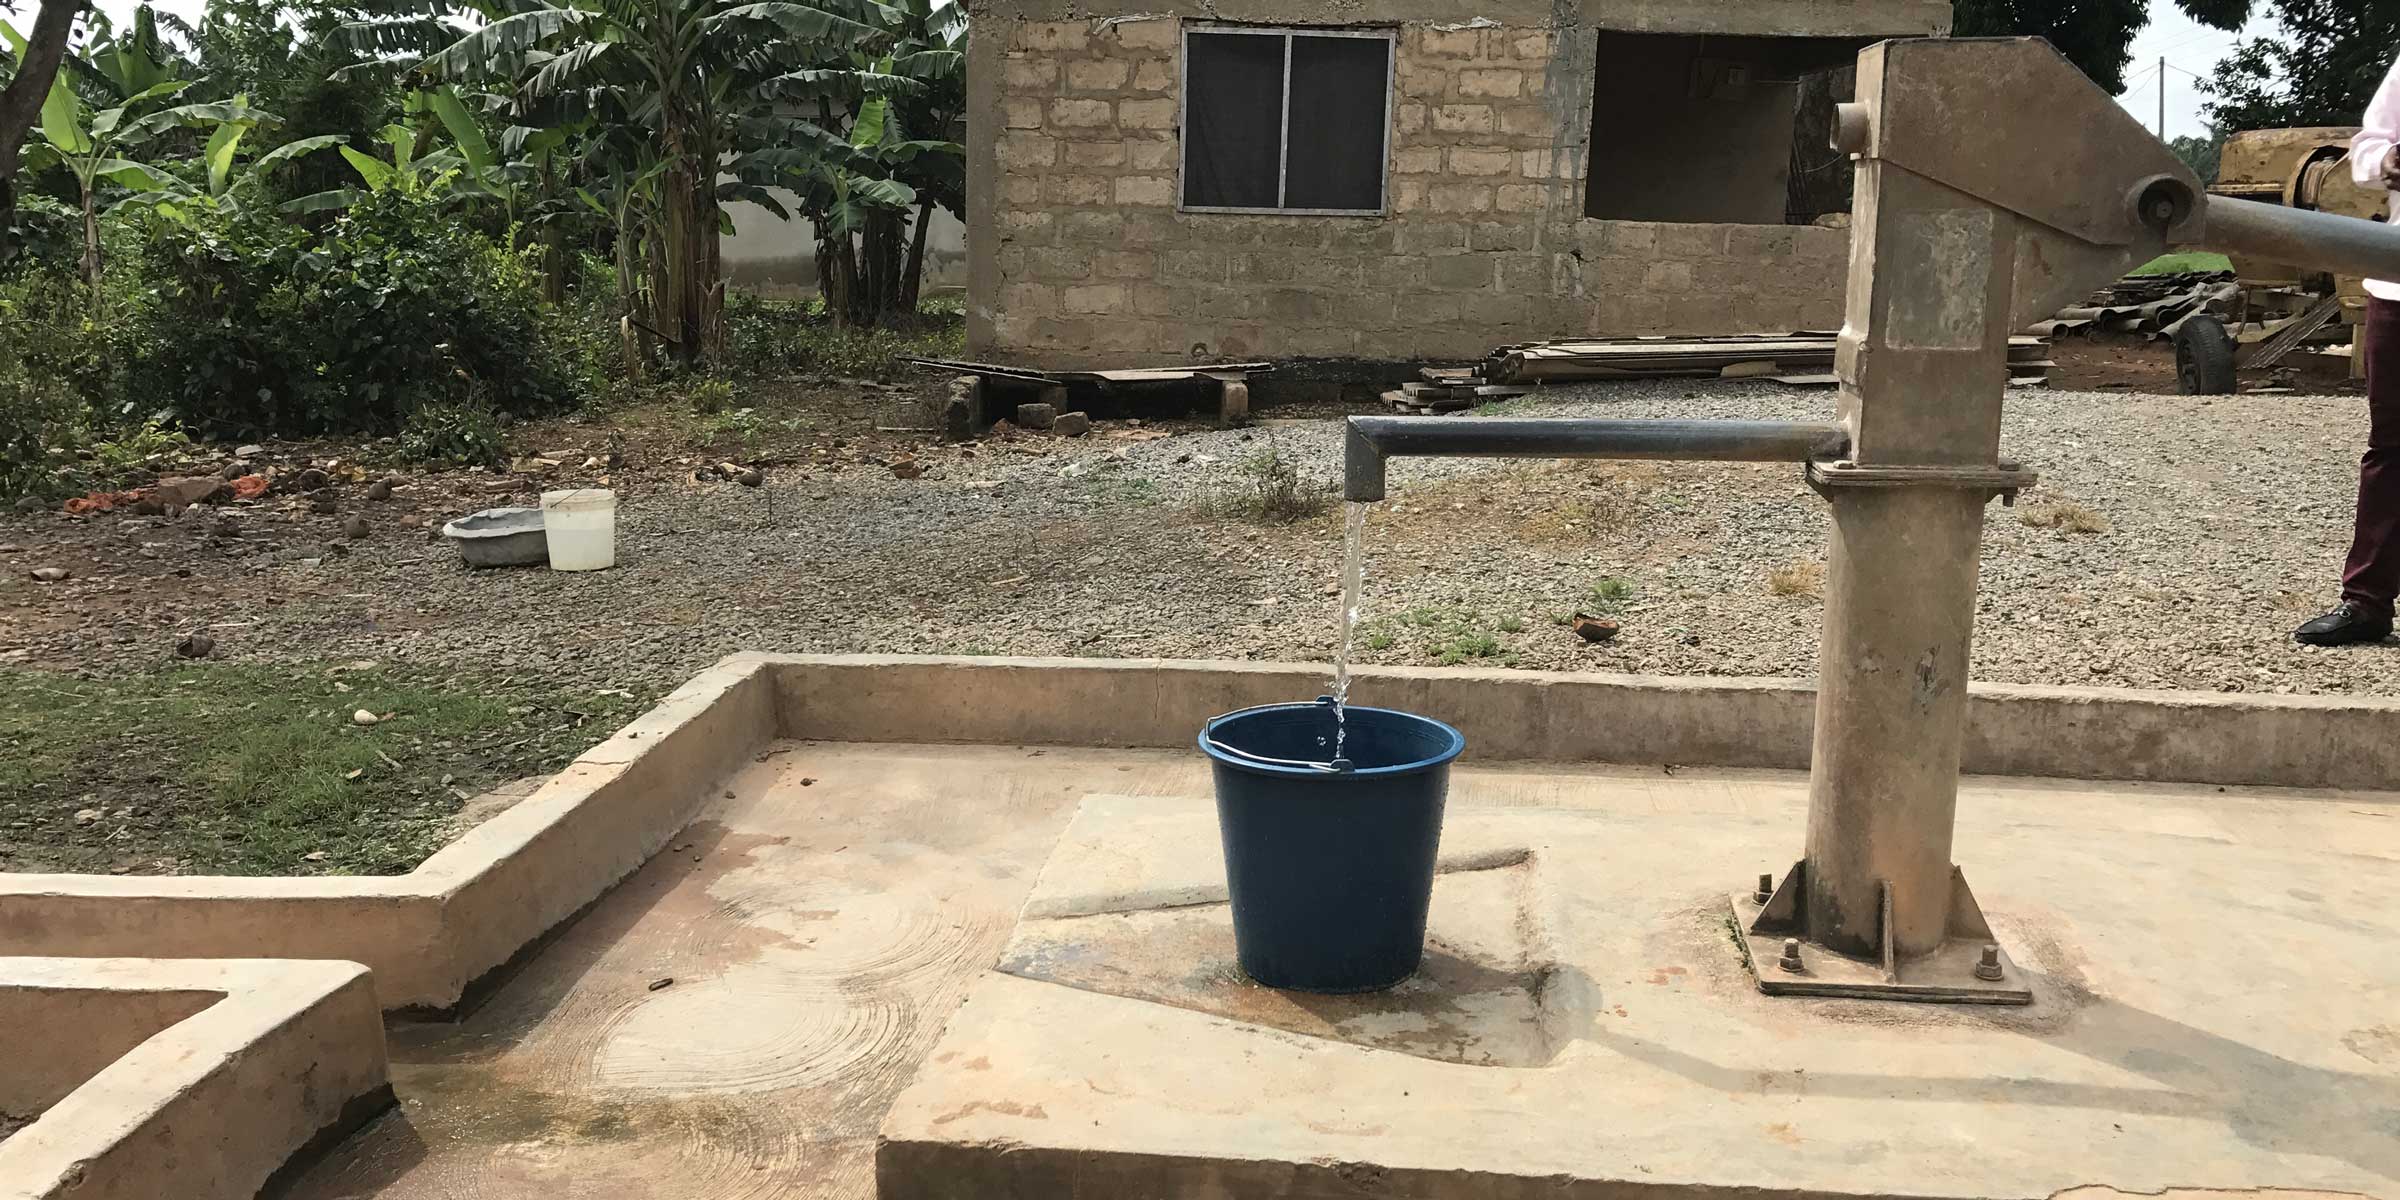 A community water point.